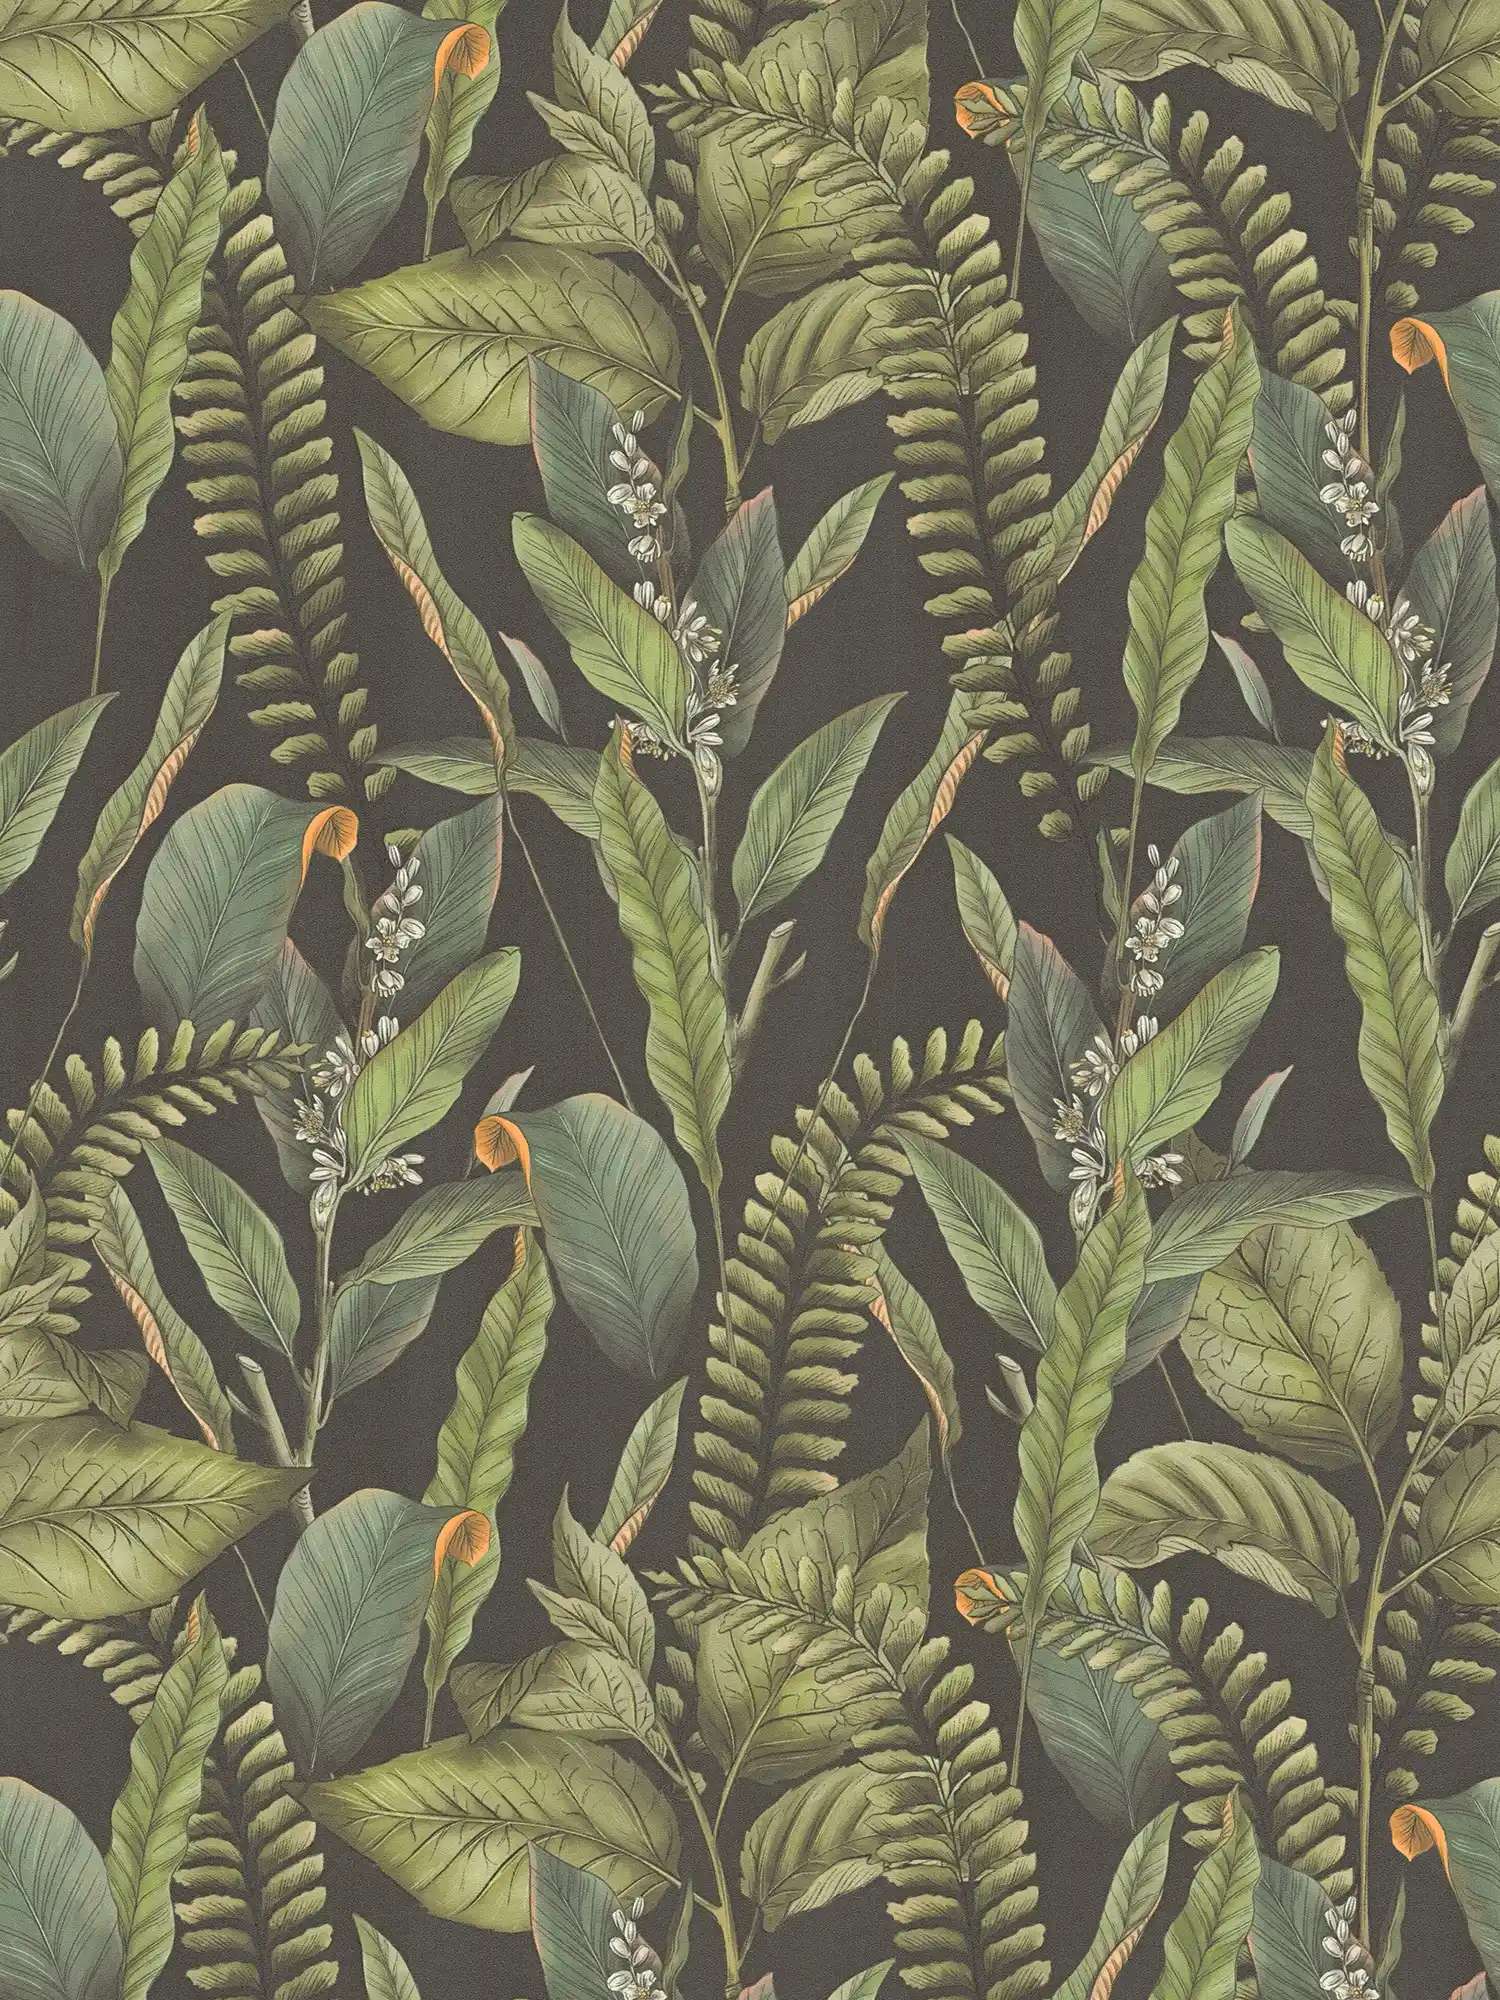 Floral style jungle wallpaper with leaves & flowers textured matt - black, green, orange
